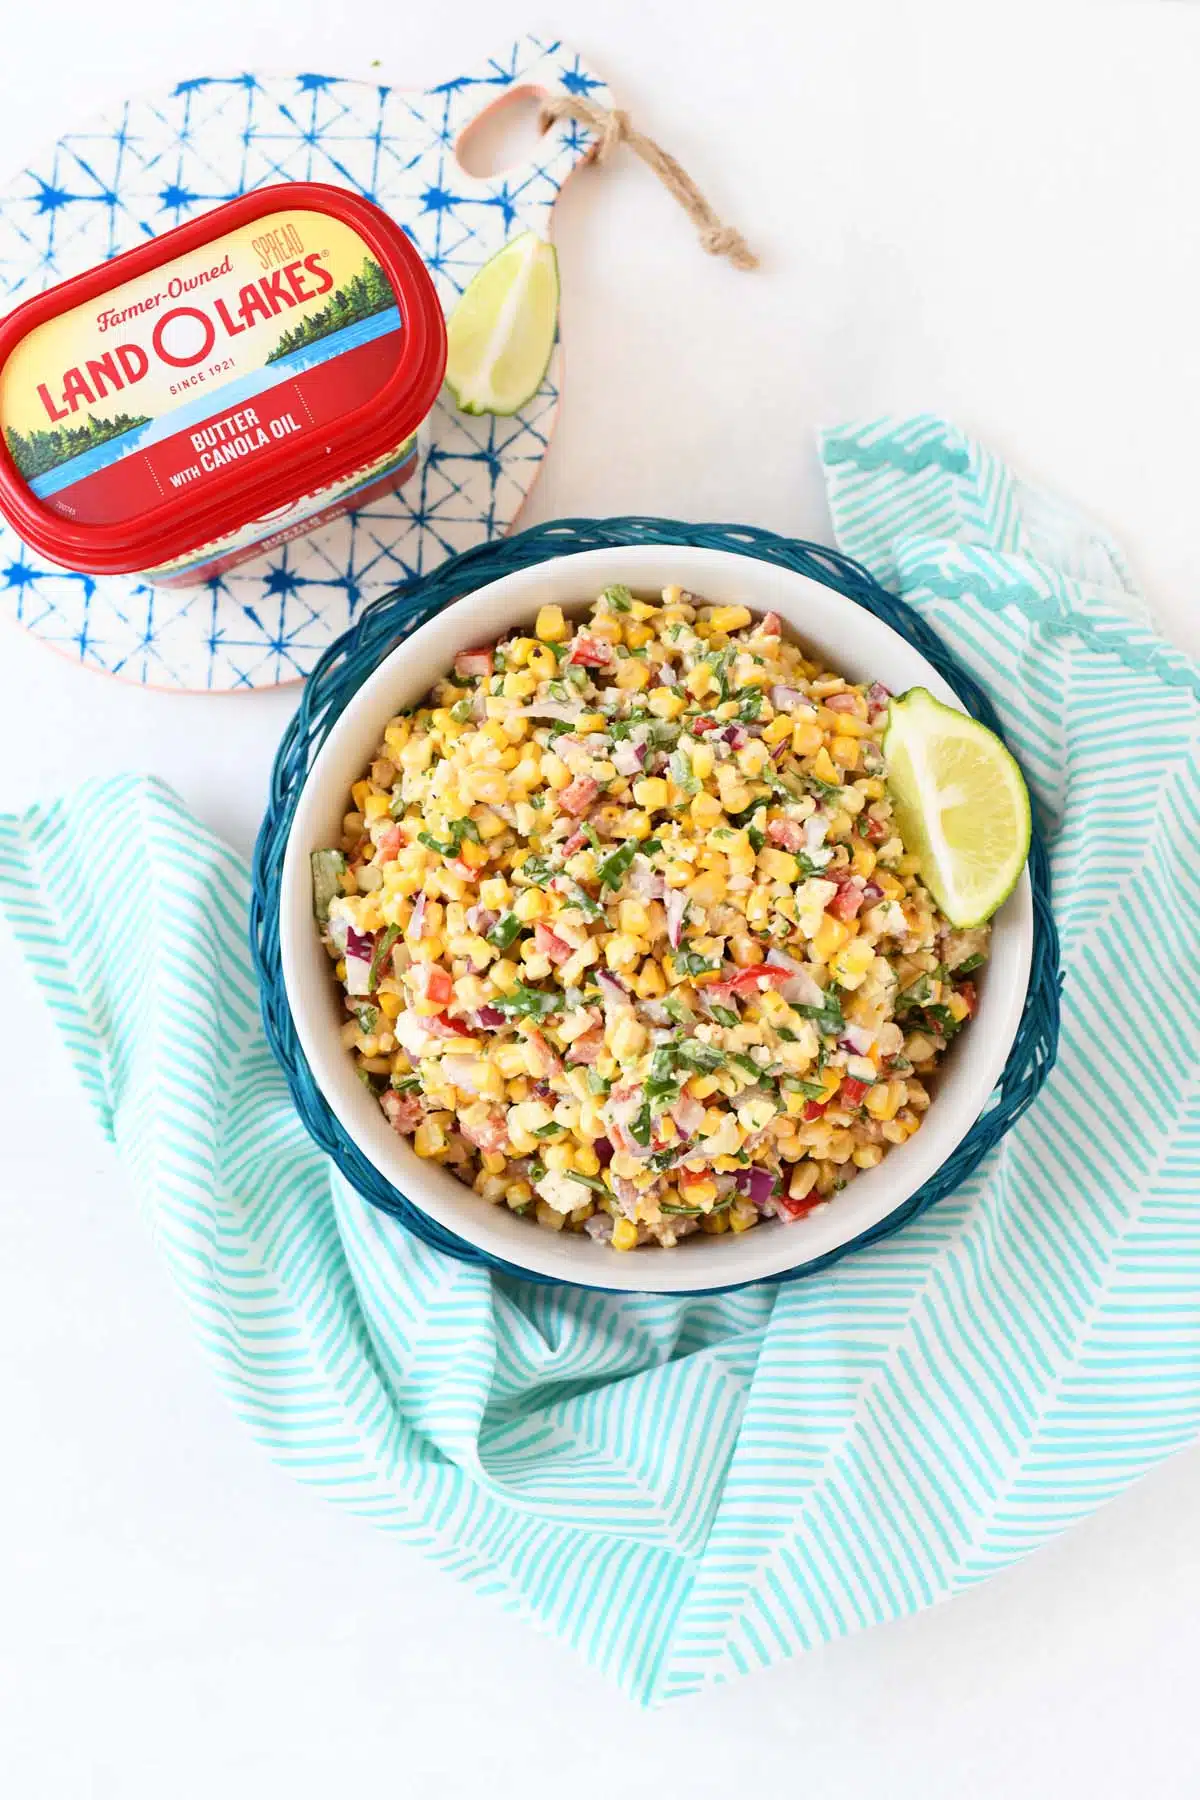 Mexican Street Corn salad in a glass bowl near a blue napkin and butter tub.